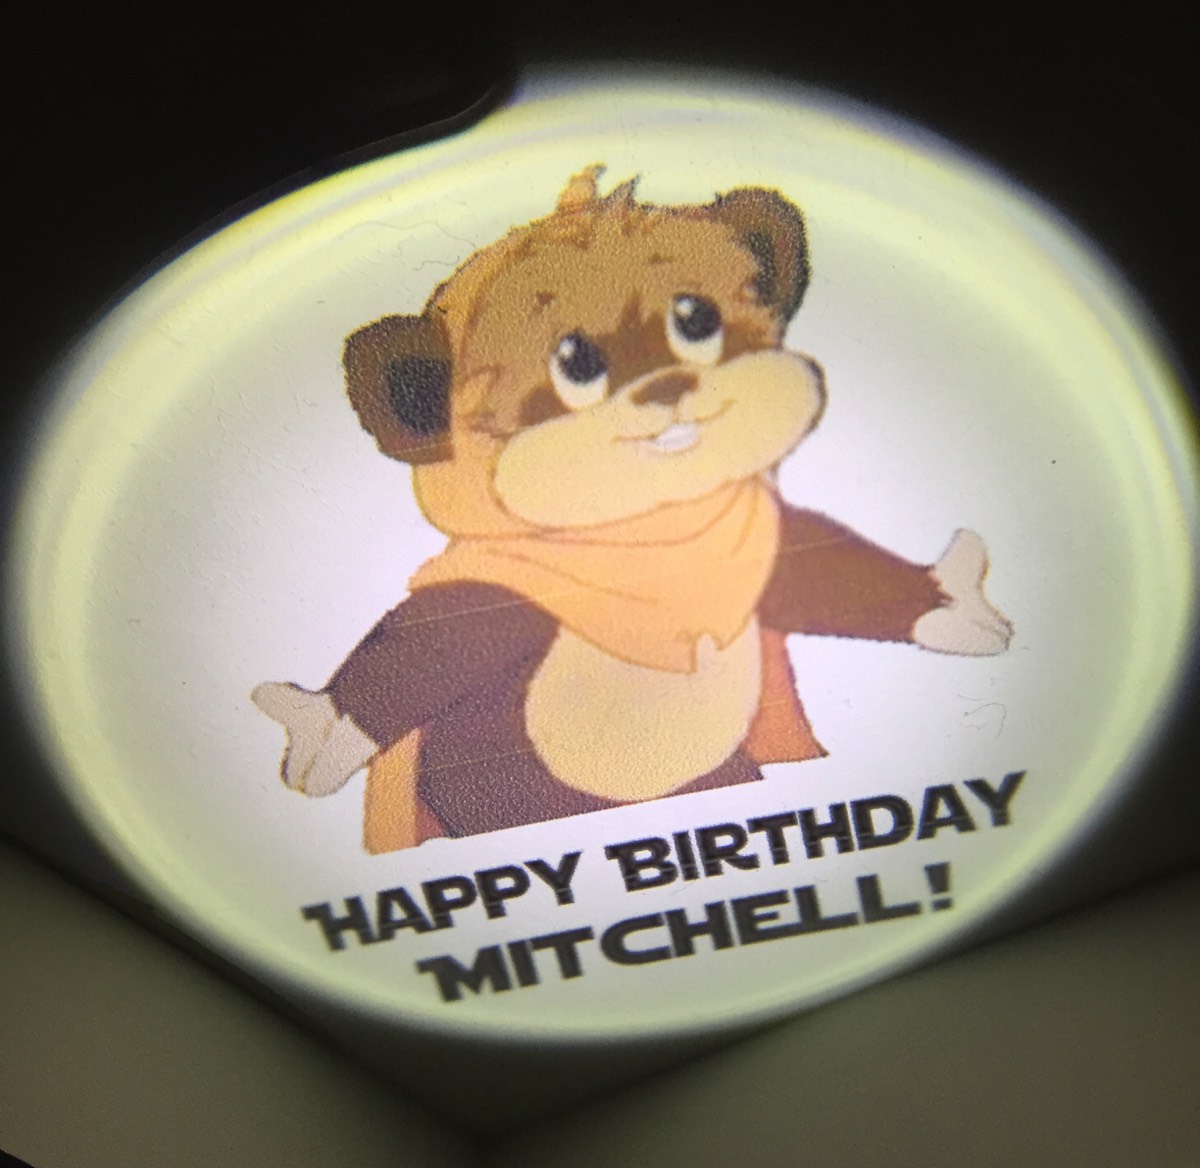 Ewok custom budget gobo for Mitchell’s first birthday.  This was a Star Wars themed birthday party.